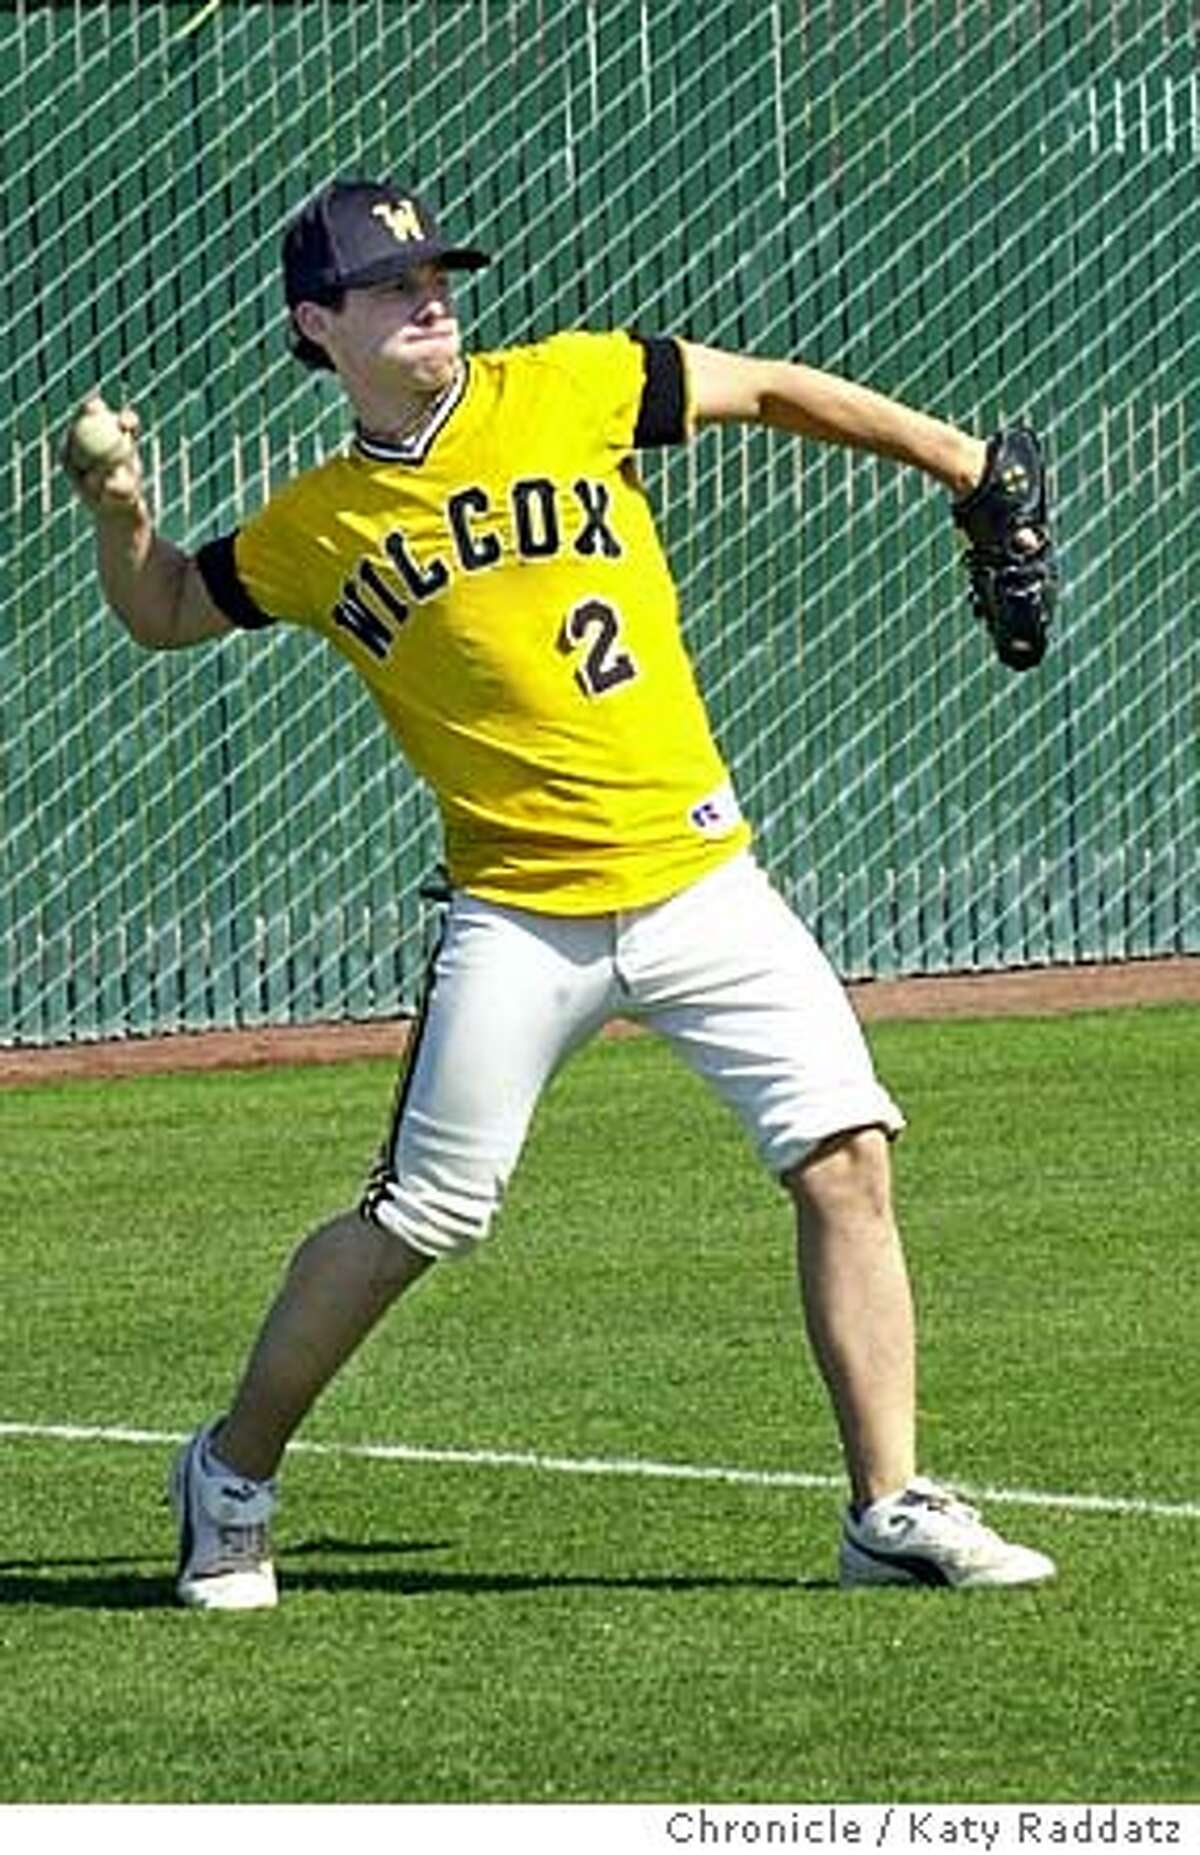 SHOWN: Jeff Gordon is a star player for Wilcox High and a star player for coach David Currie. Wilcox High School in Santa Clara continues to be a baseball success in the Central Coast Section. Shoot date is 4/29/04; reporter is Jordan Robertson (freelance). Katy Raddatz / The Chronicle